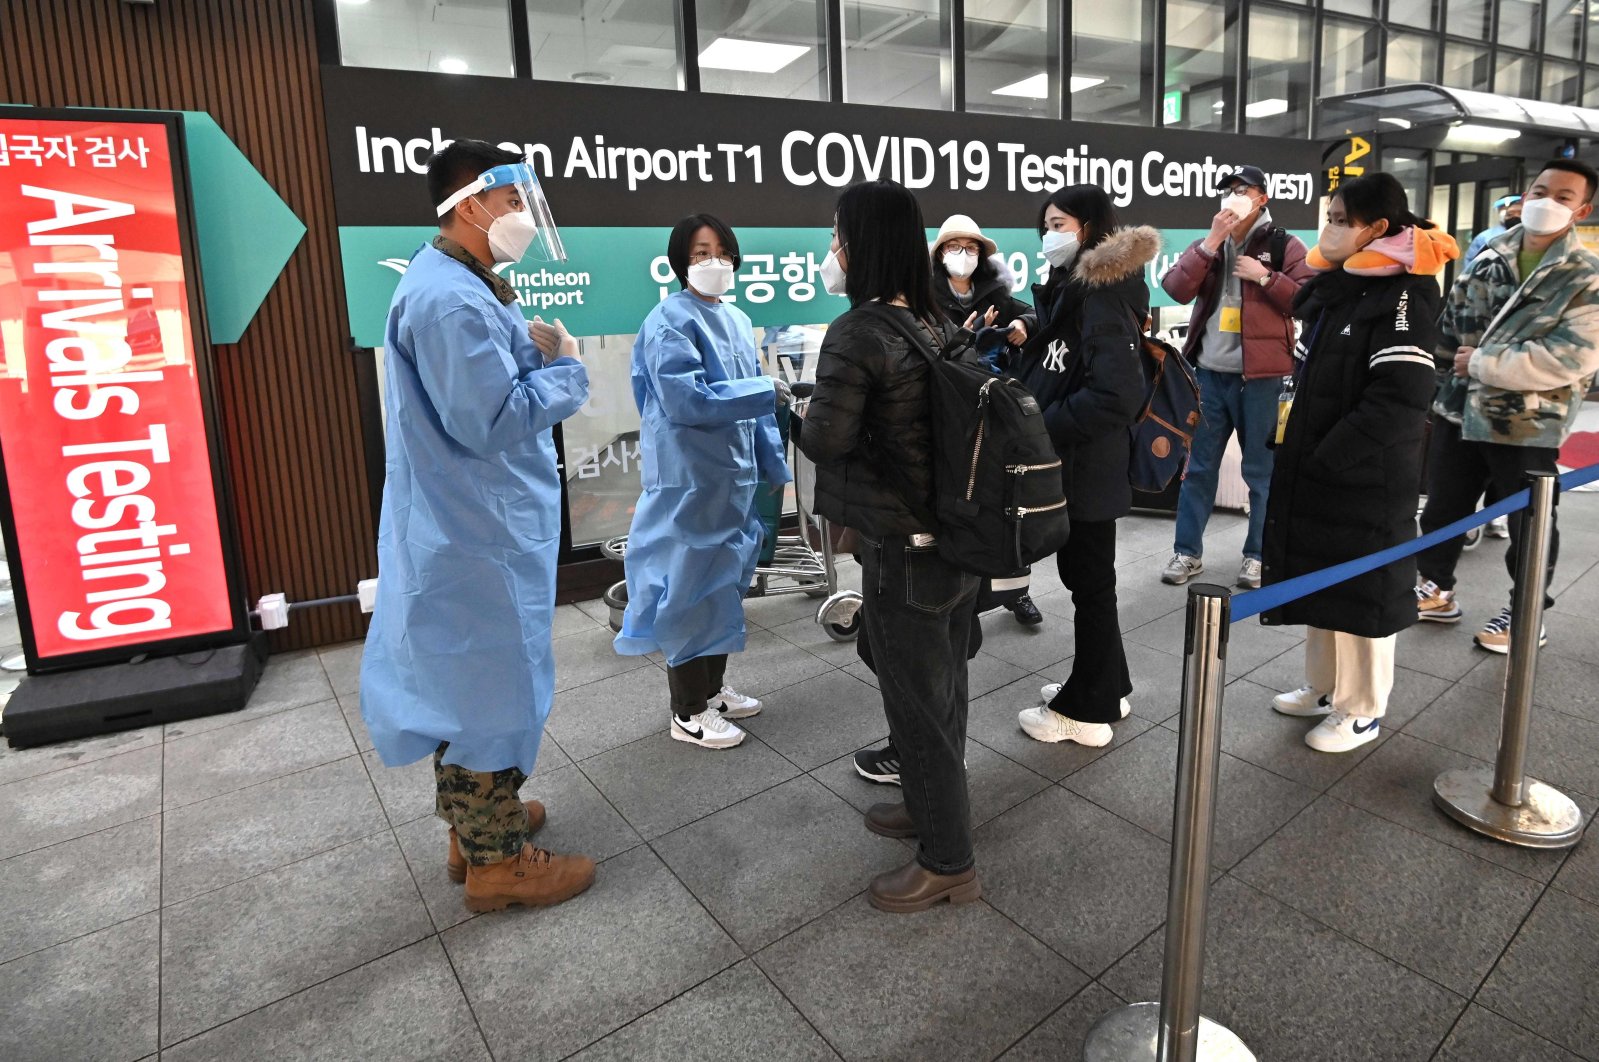 Health workers guide travelers arriving from China in front of a COVID-19 testing center at Incheon International Airport, Seoul, South Korea, Jan. 3, 2023. (AFP Photo)